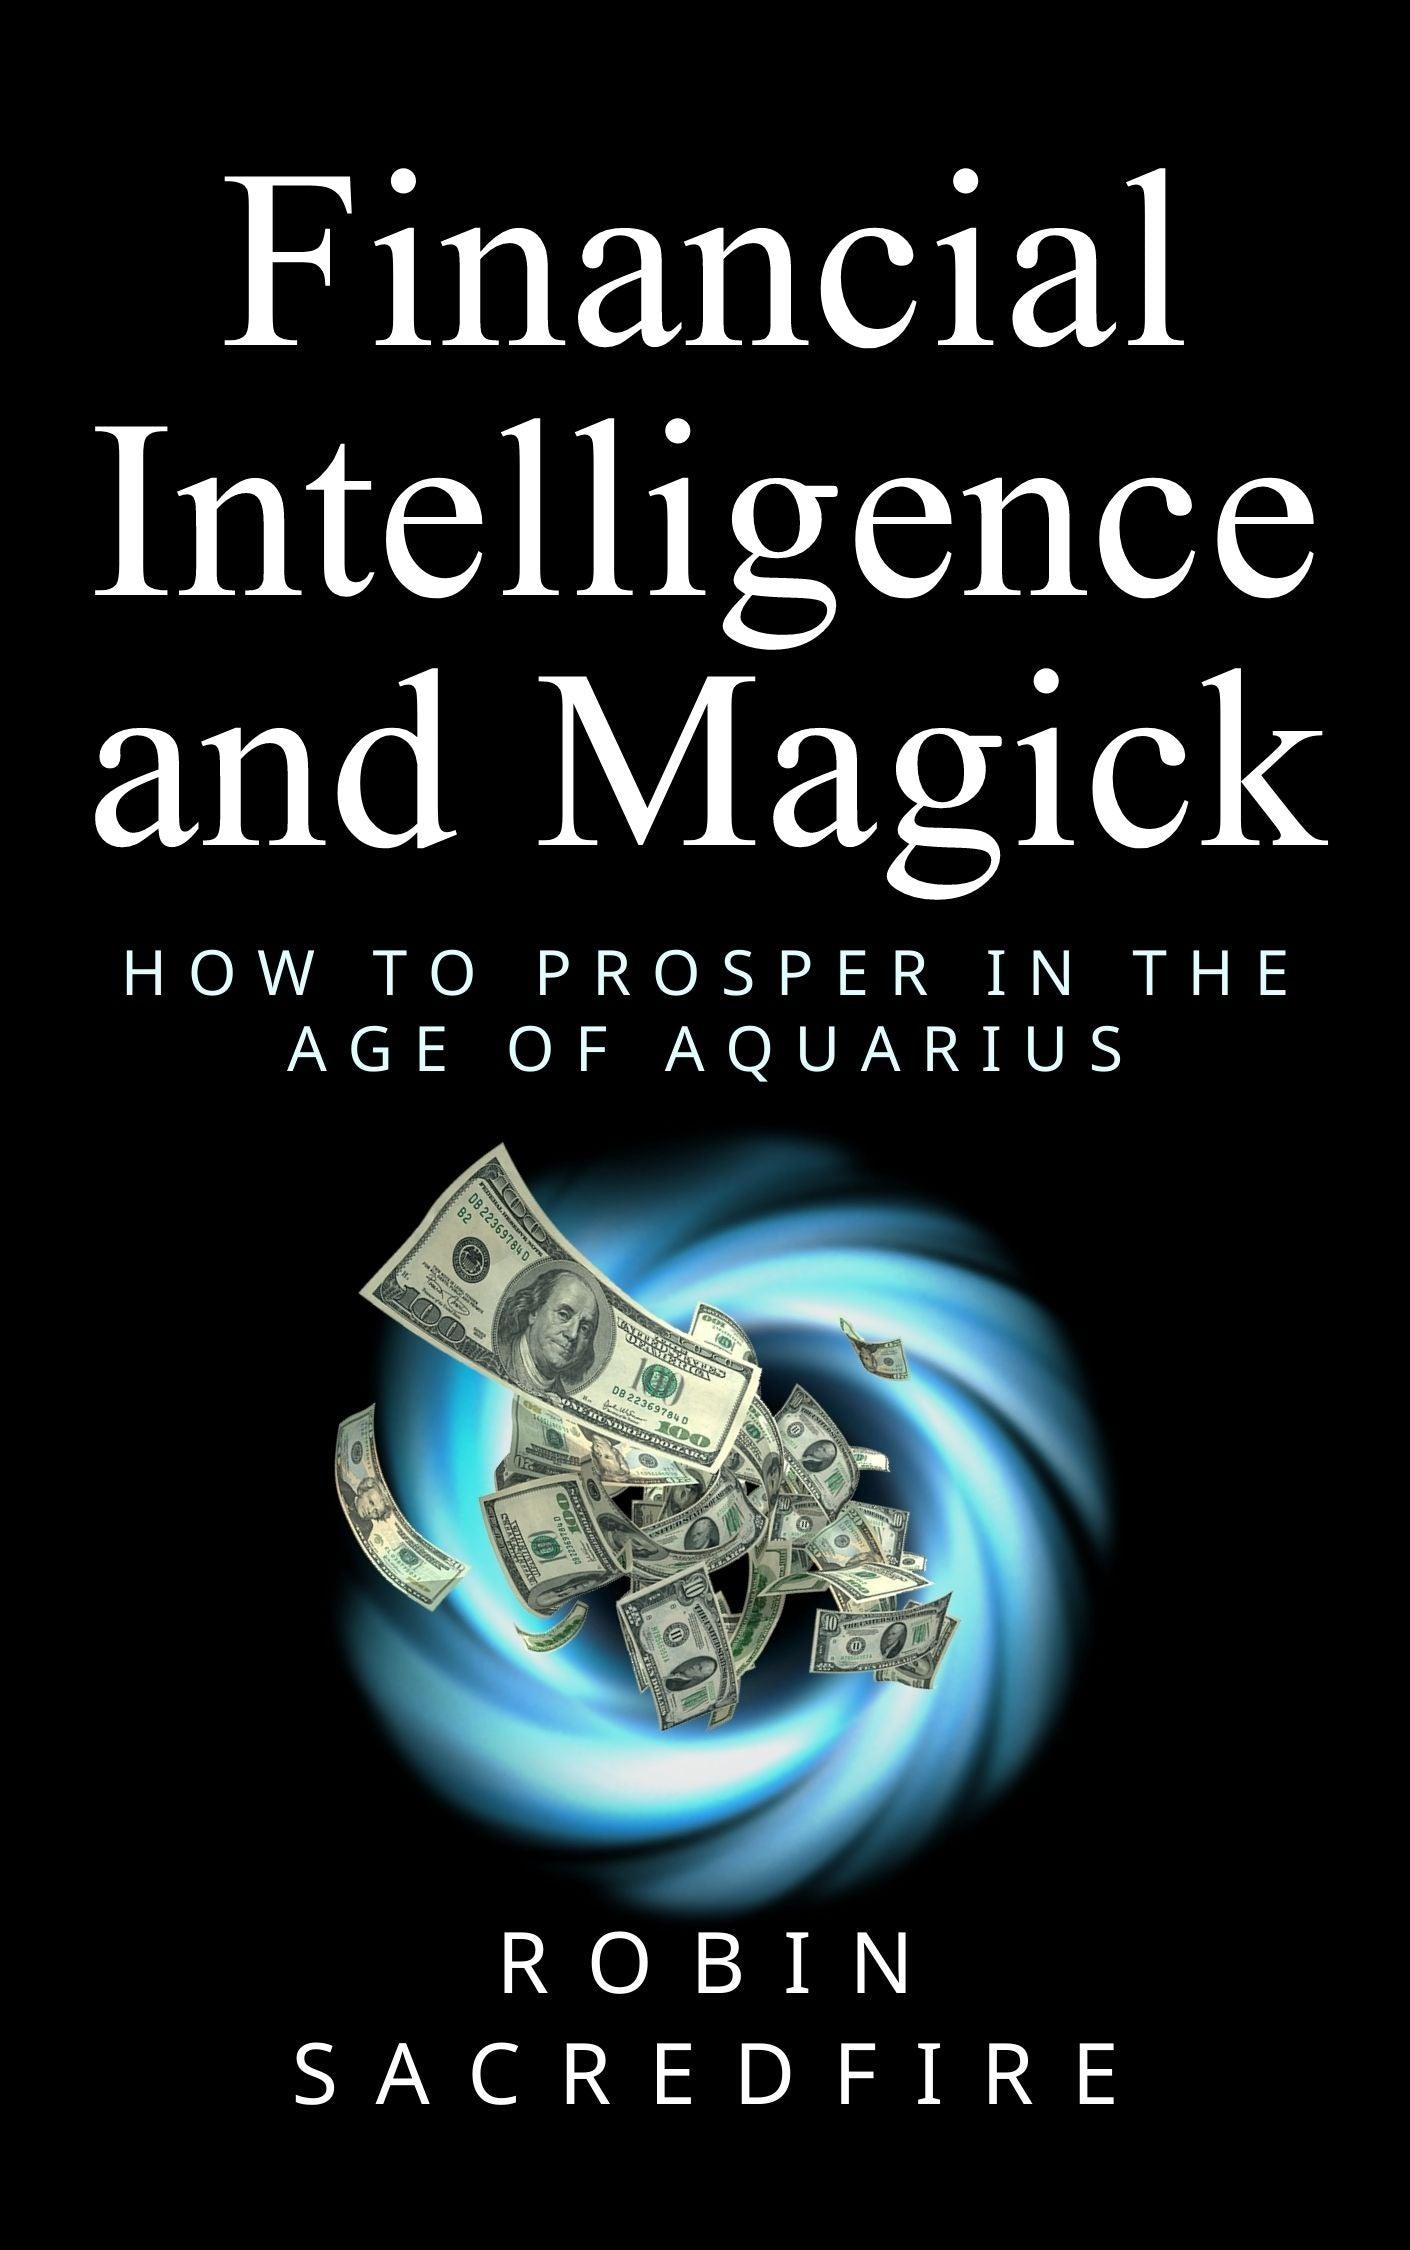 Financial Intelligence and Magick - 22 Lions